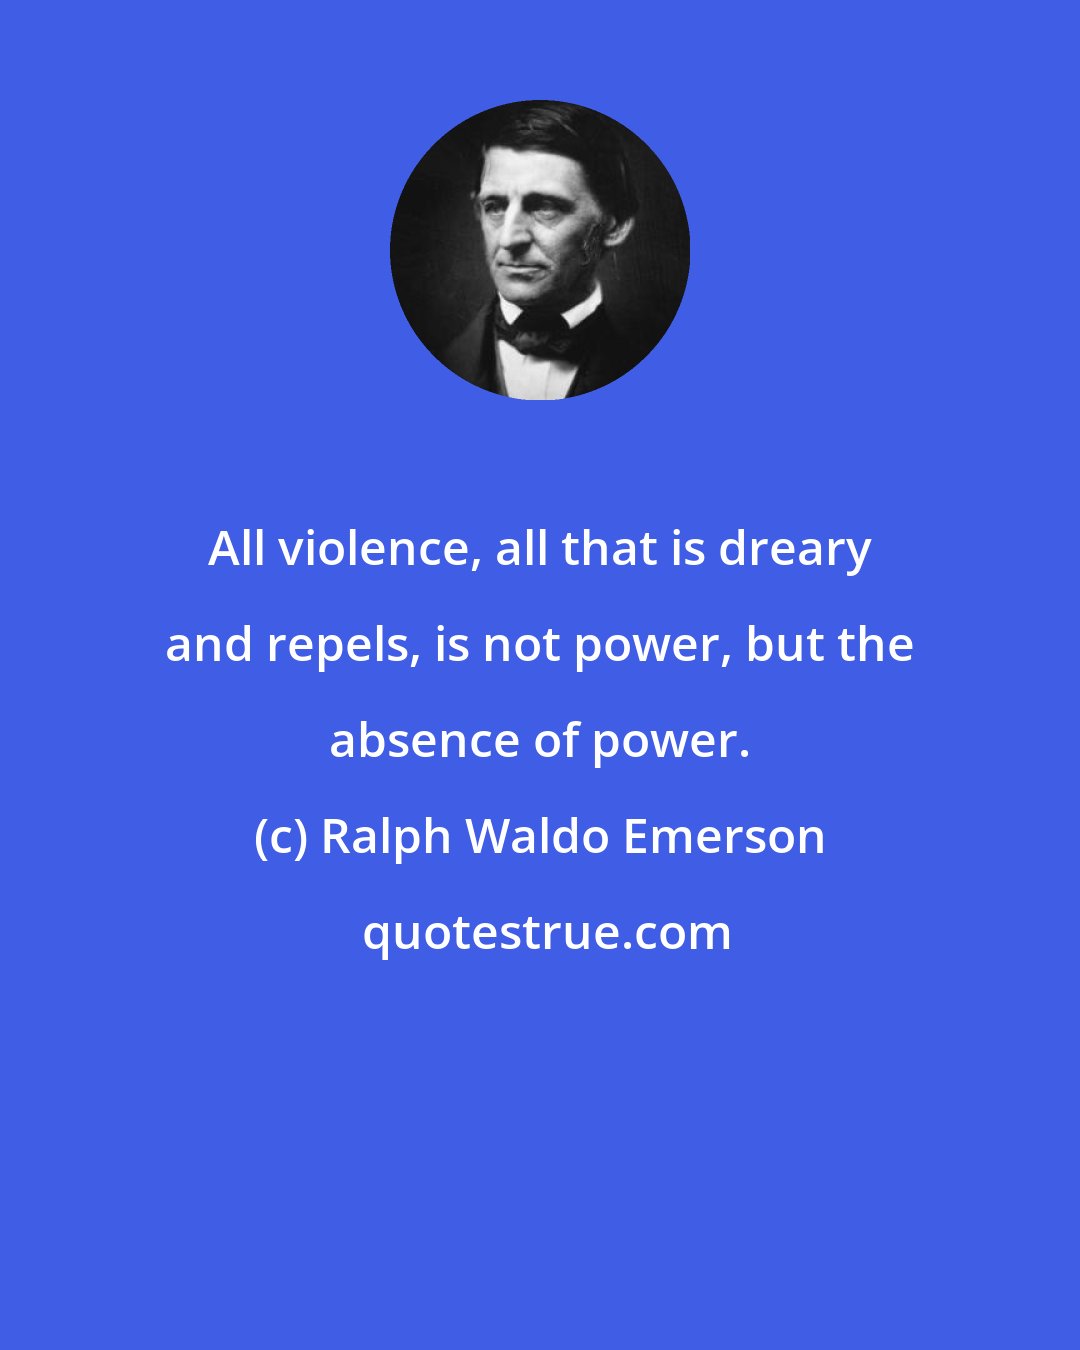 Ralph Waldo Emerson: All violence, all that is dreary and repels, is not power, but the absence of power.